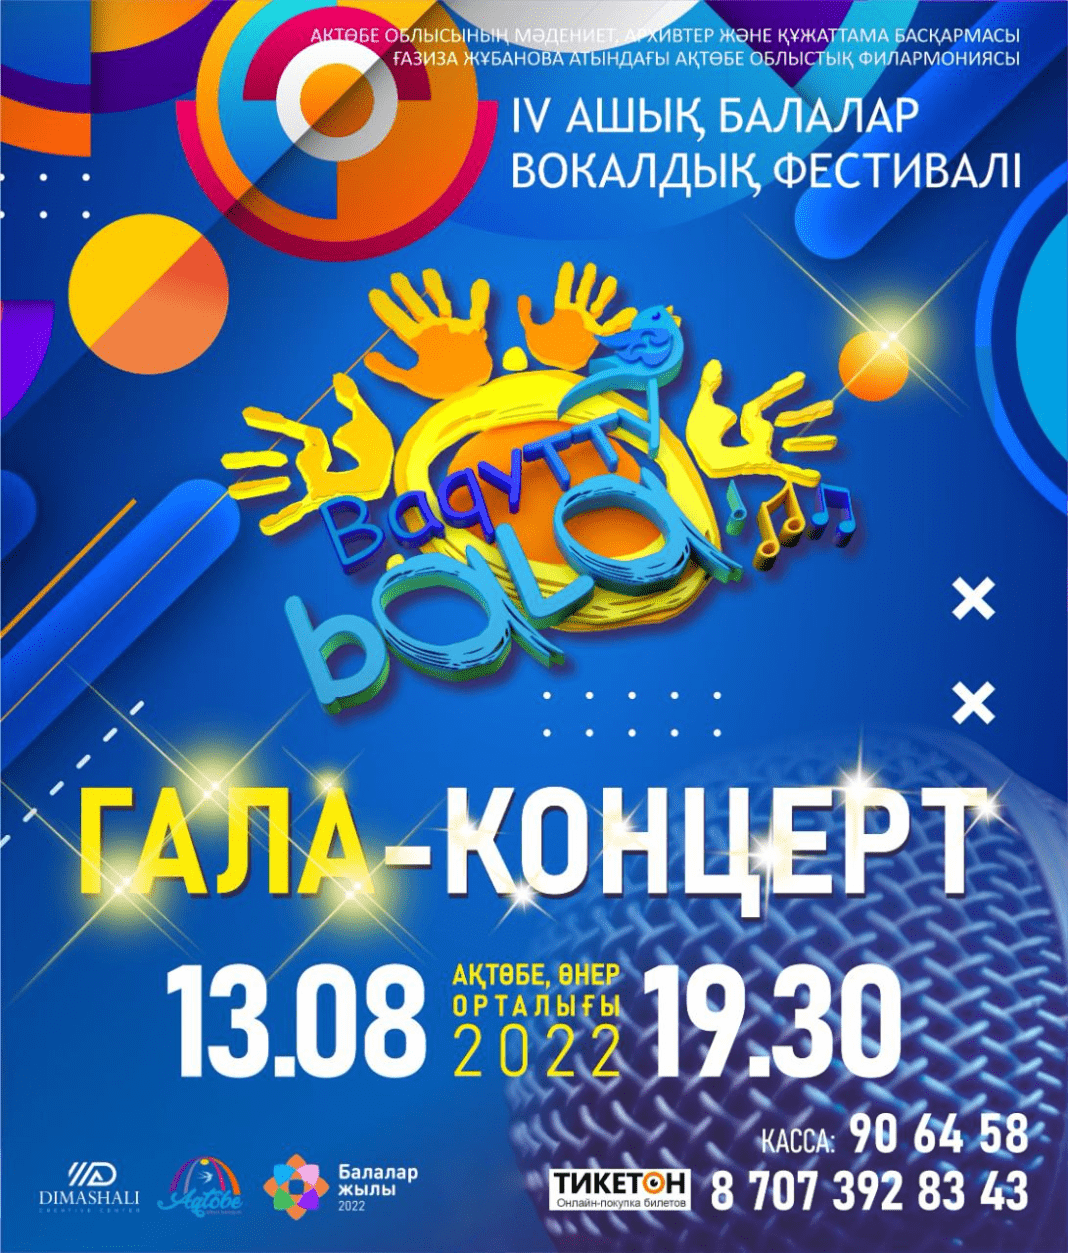 Children's vocal competition "Baqytty Bala-2022" will be held in Aktobe